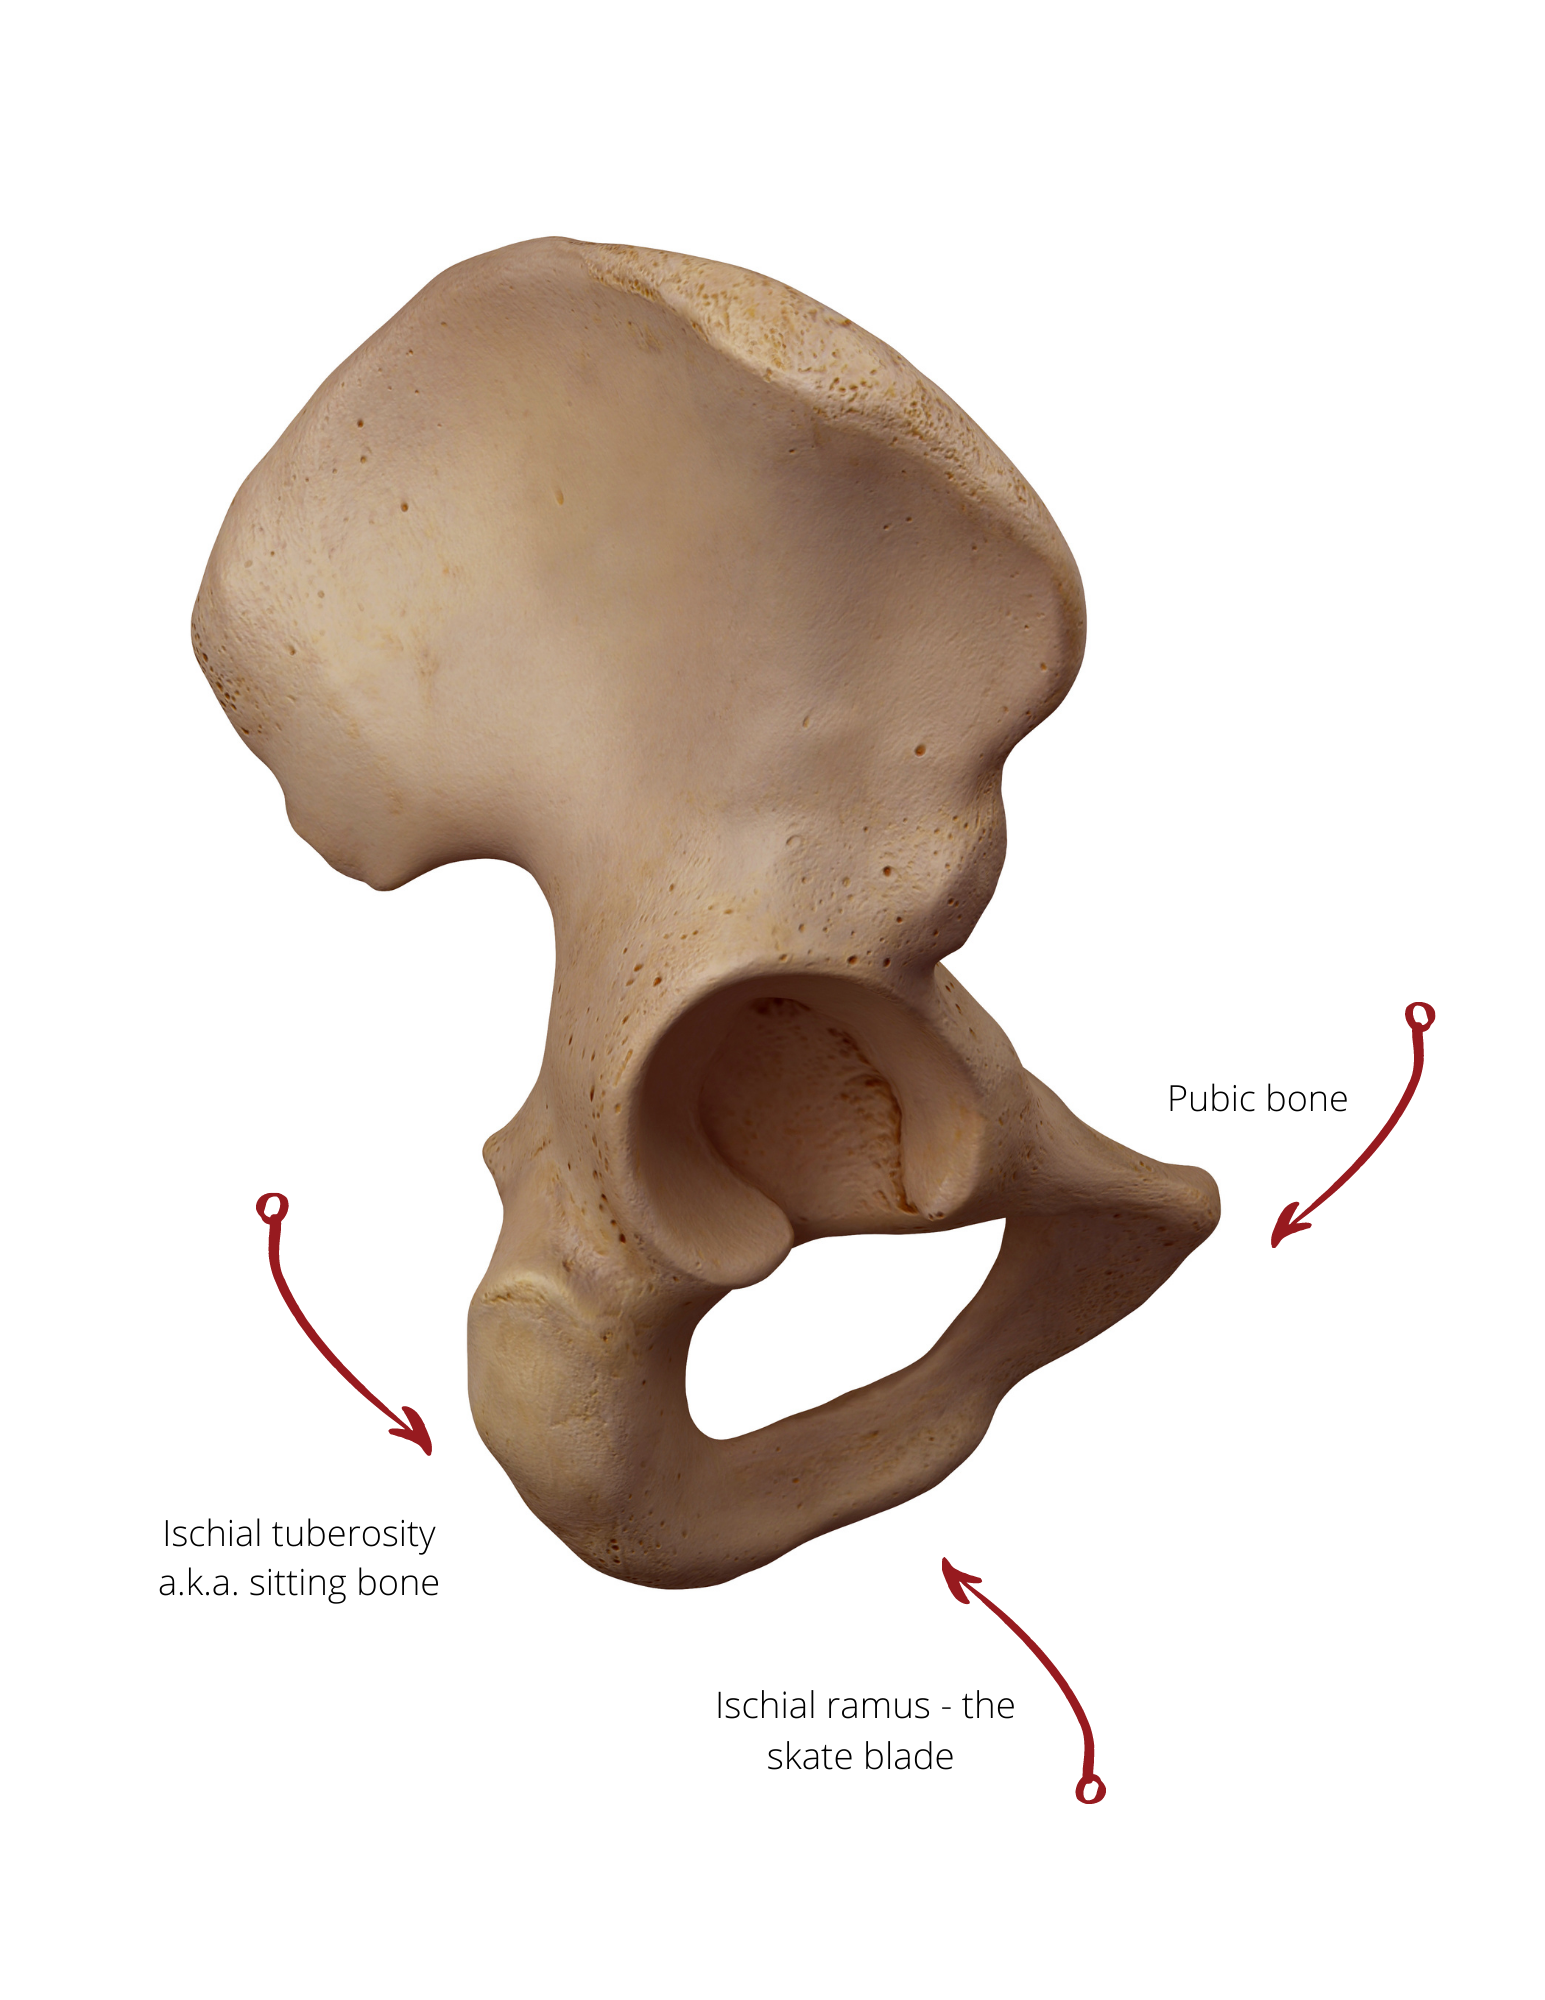 Sitting bone pain: are you sitting on the wrong bones? - Spinefulness